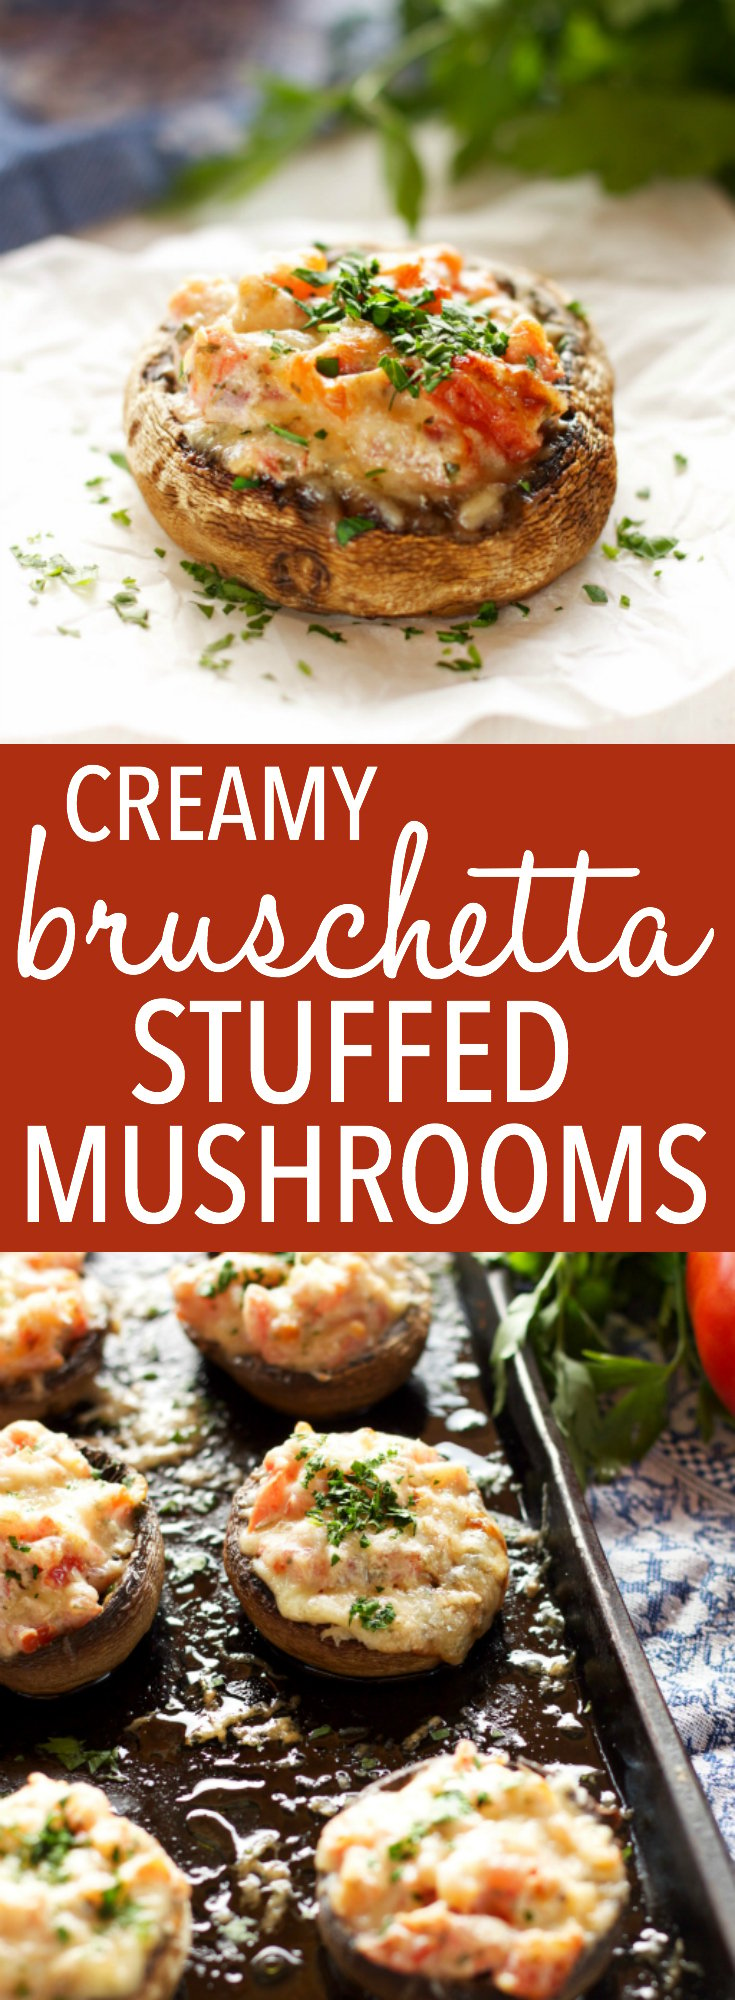 These Creamy Bruschetta Stuffed Mushrooms are the perfect easy appetizer packed with fresh tomatoes and herbs, and 3 delicious cheeses! Recipe by thebusybaker.ca! via @busybakerblog